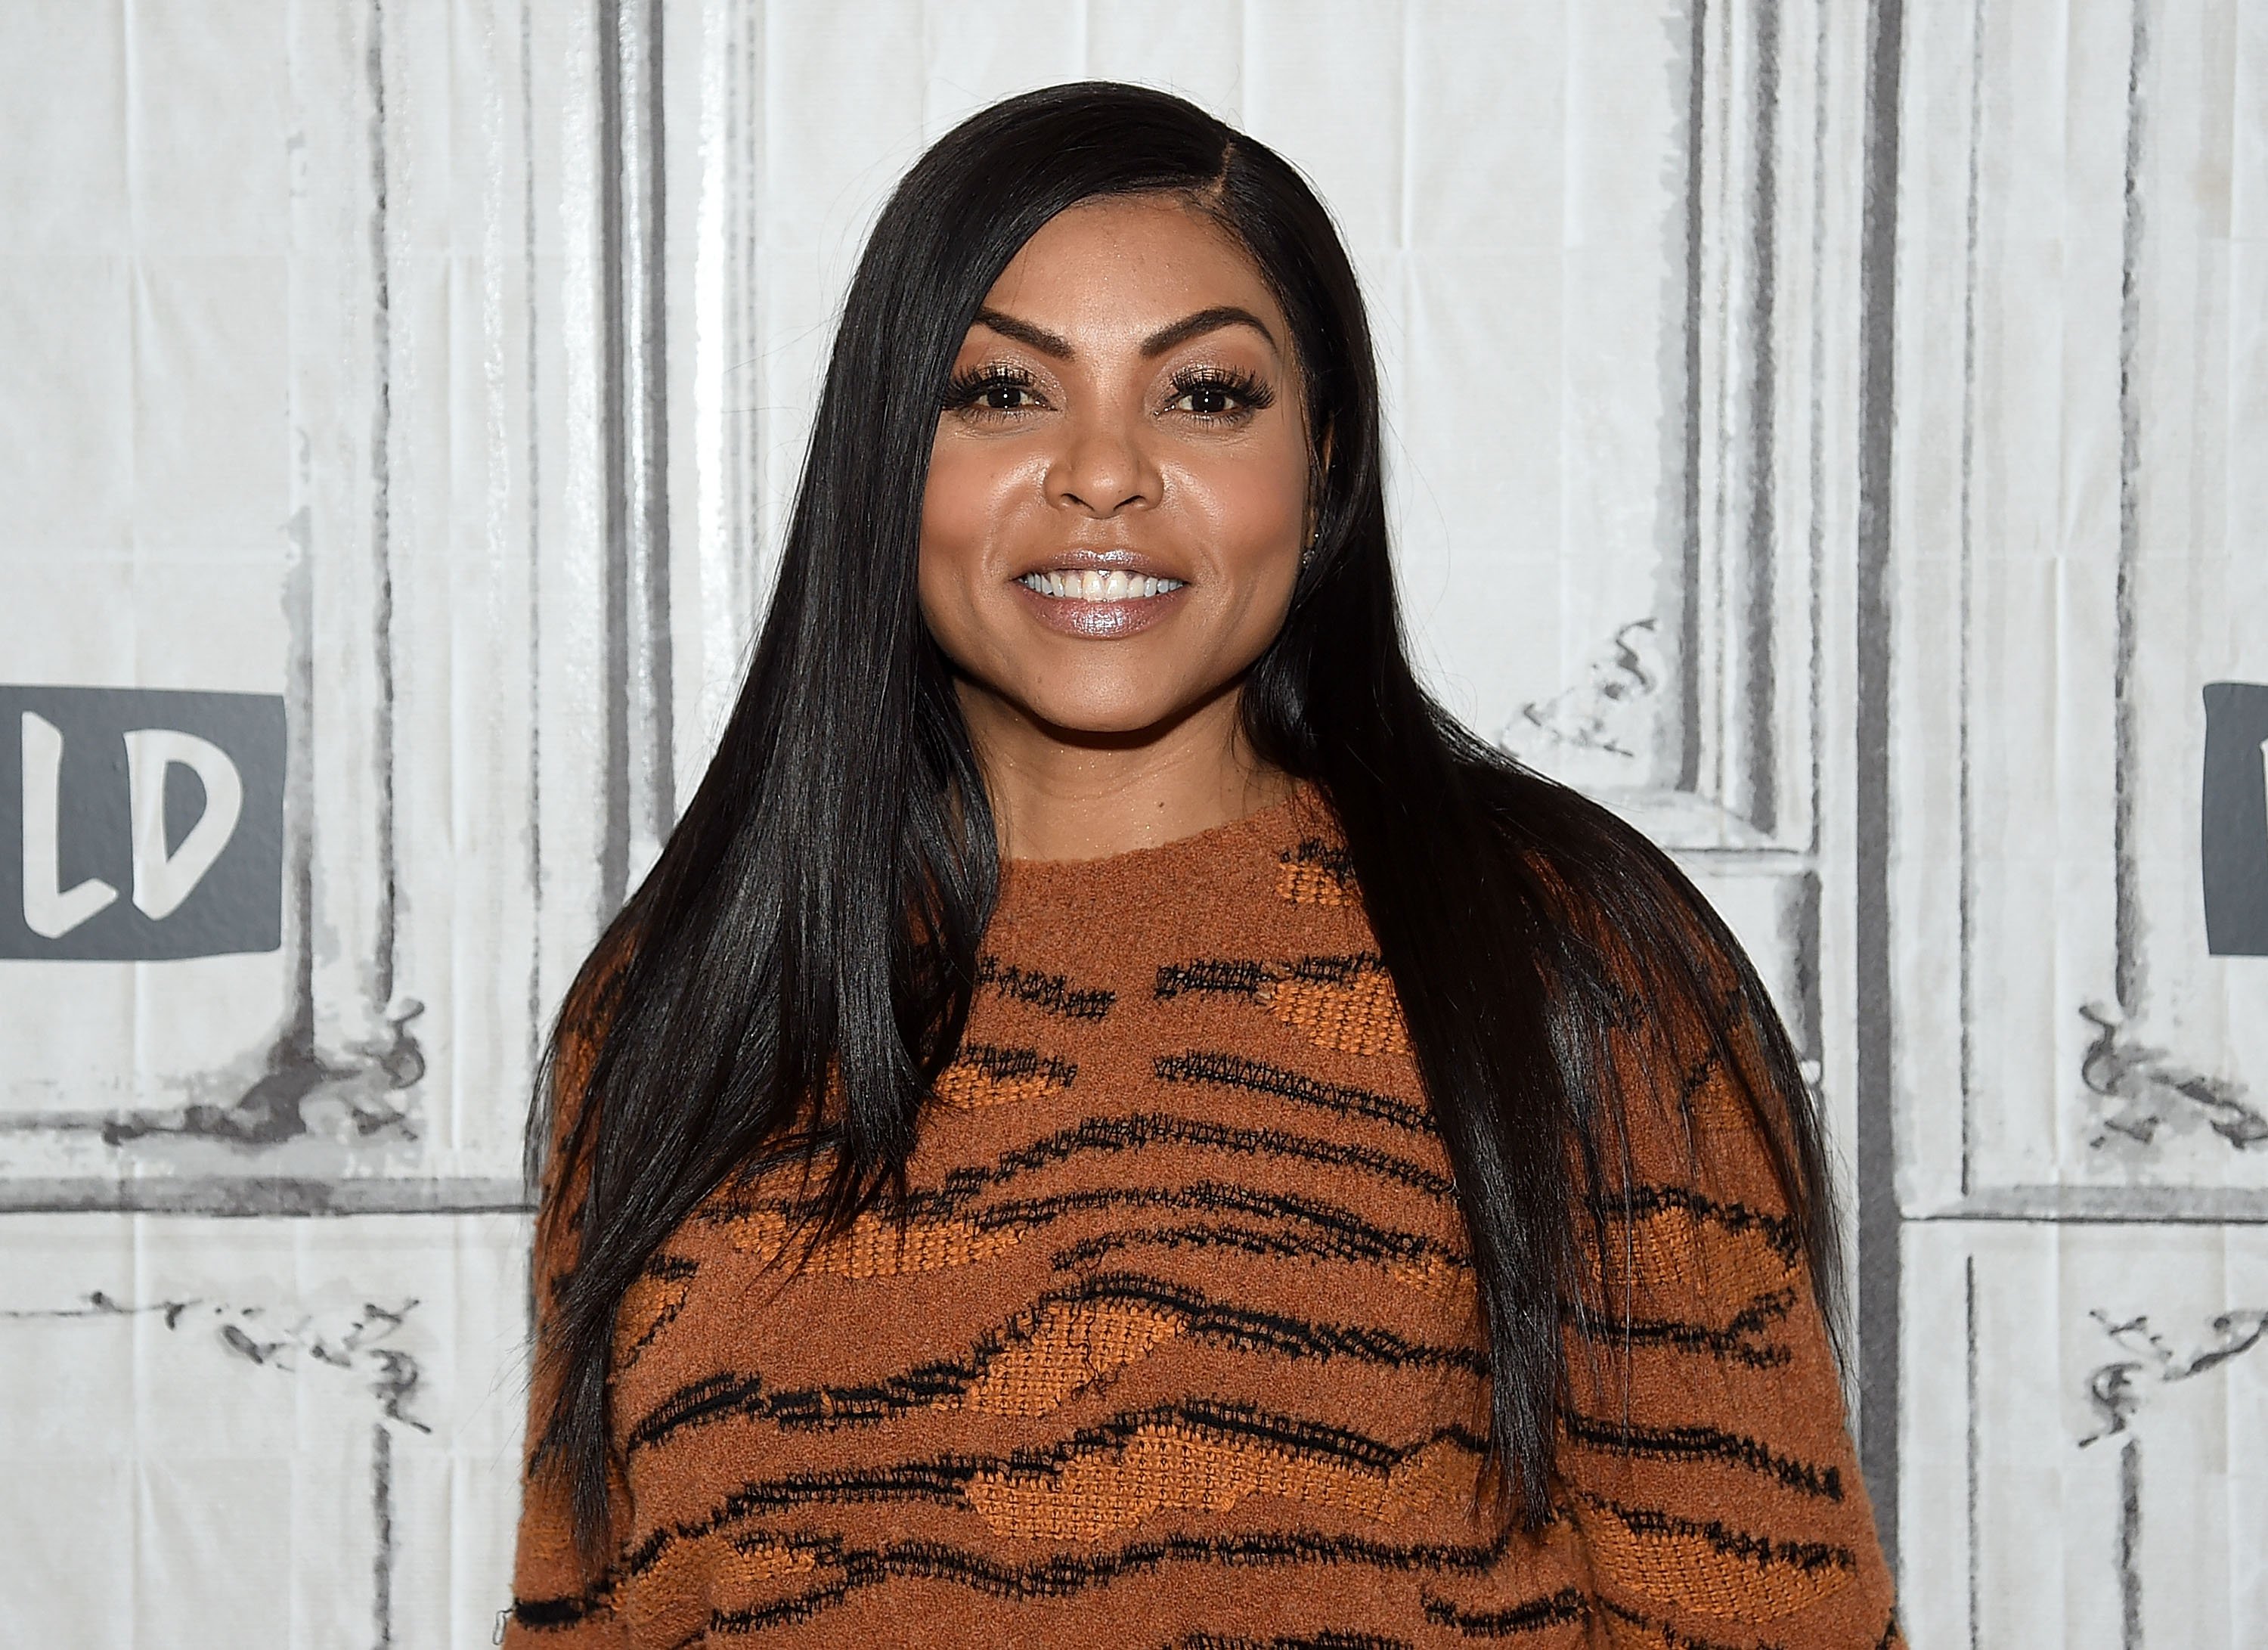 Taraji P. Henson visits Build series to discuss their film "Acrimony" at Build Studio on March 26, 2018 | Photo: Getty Images